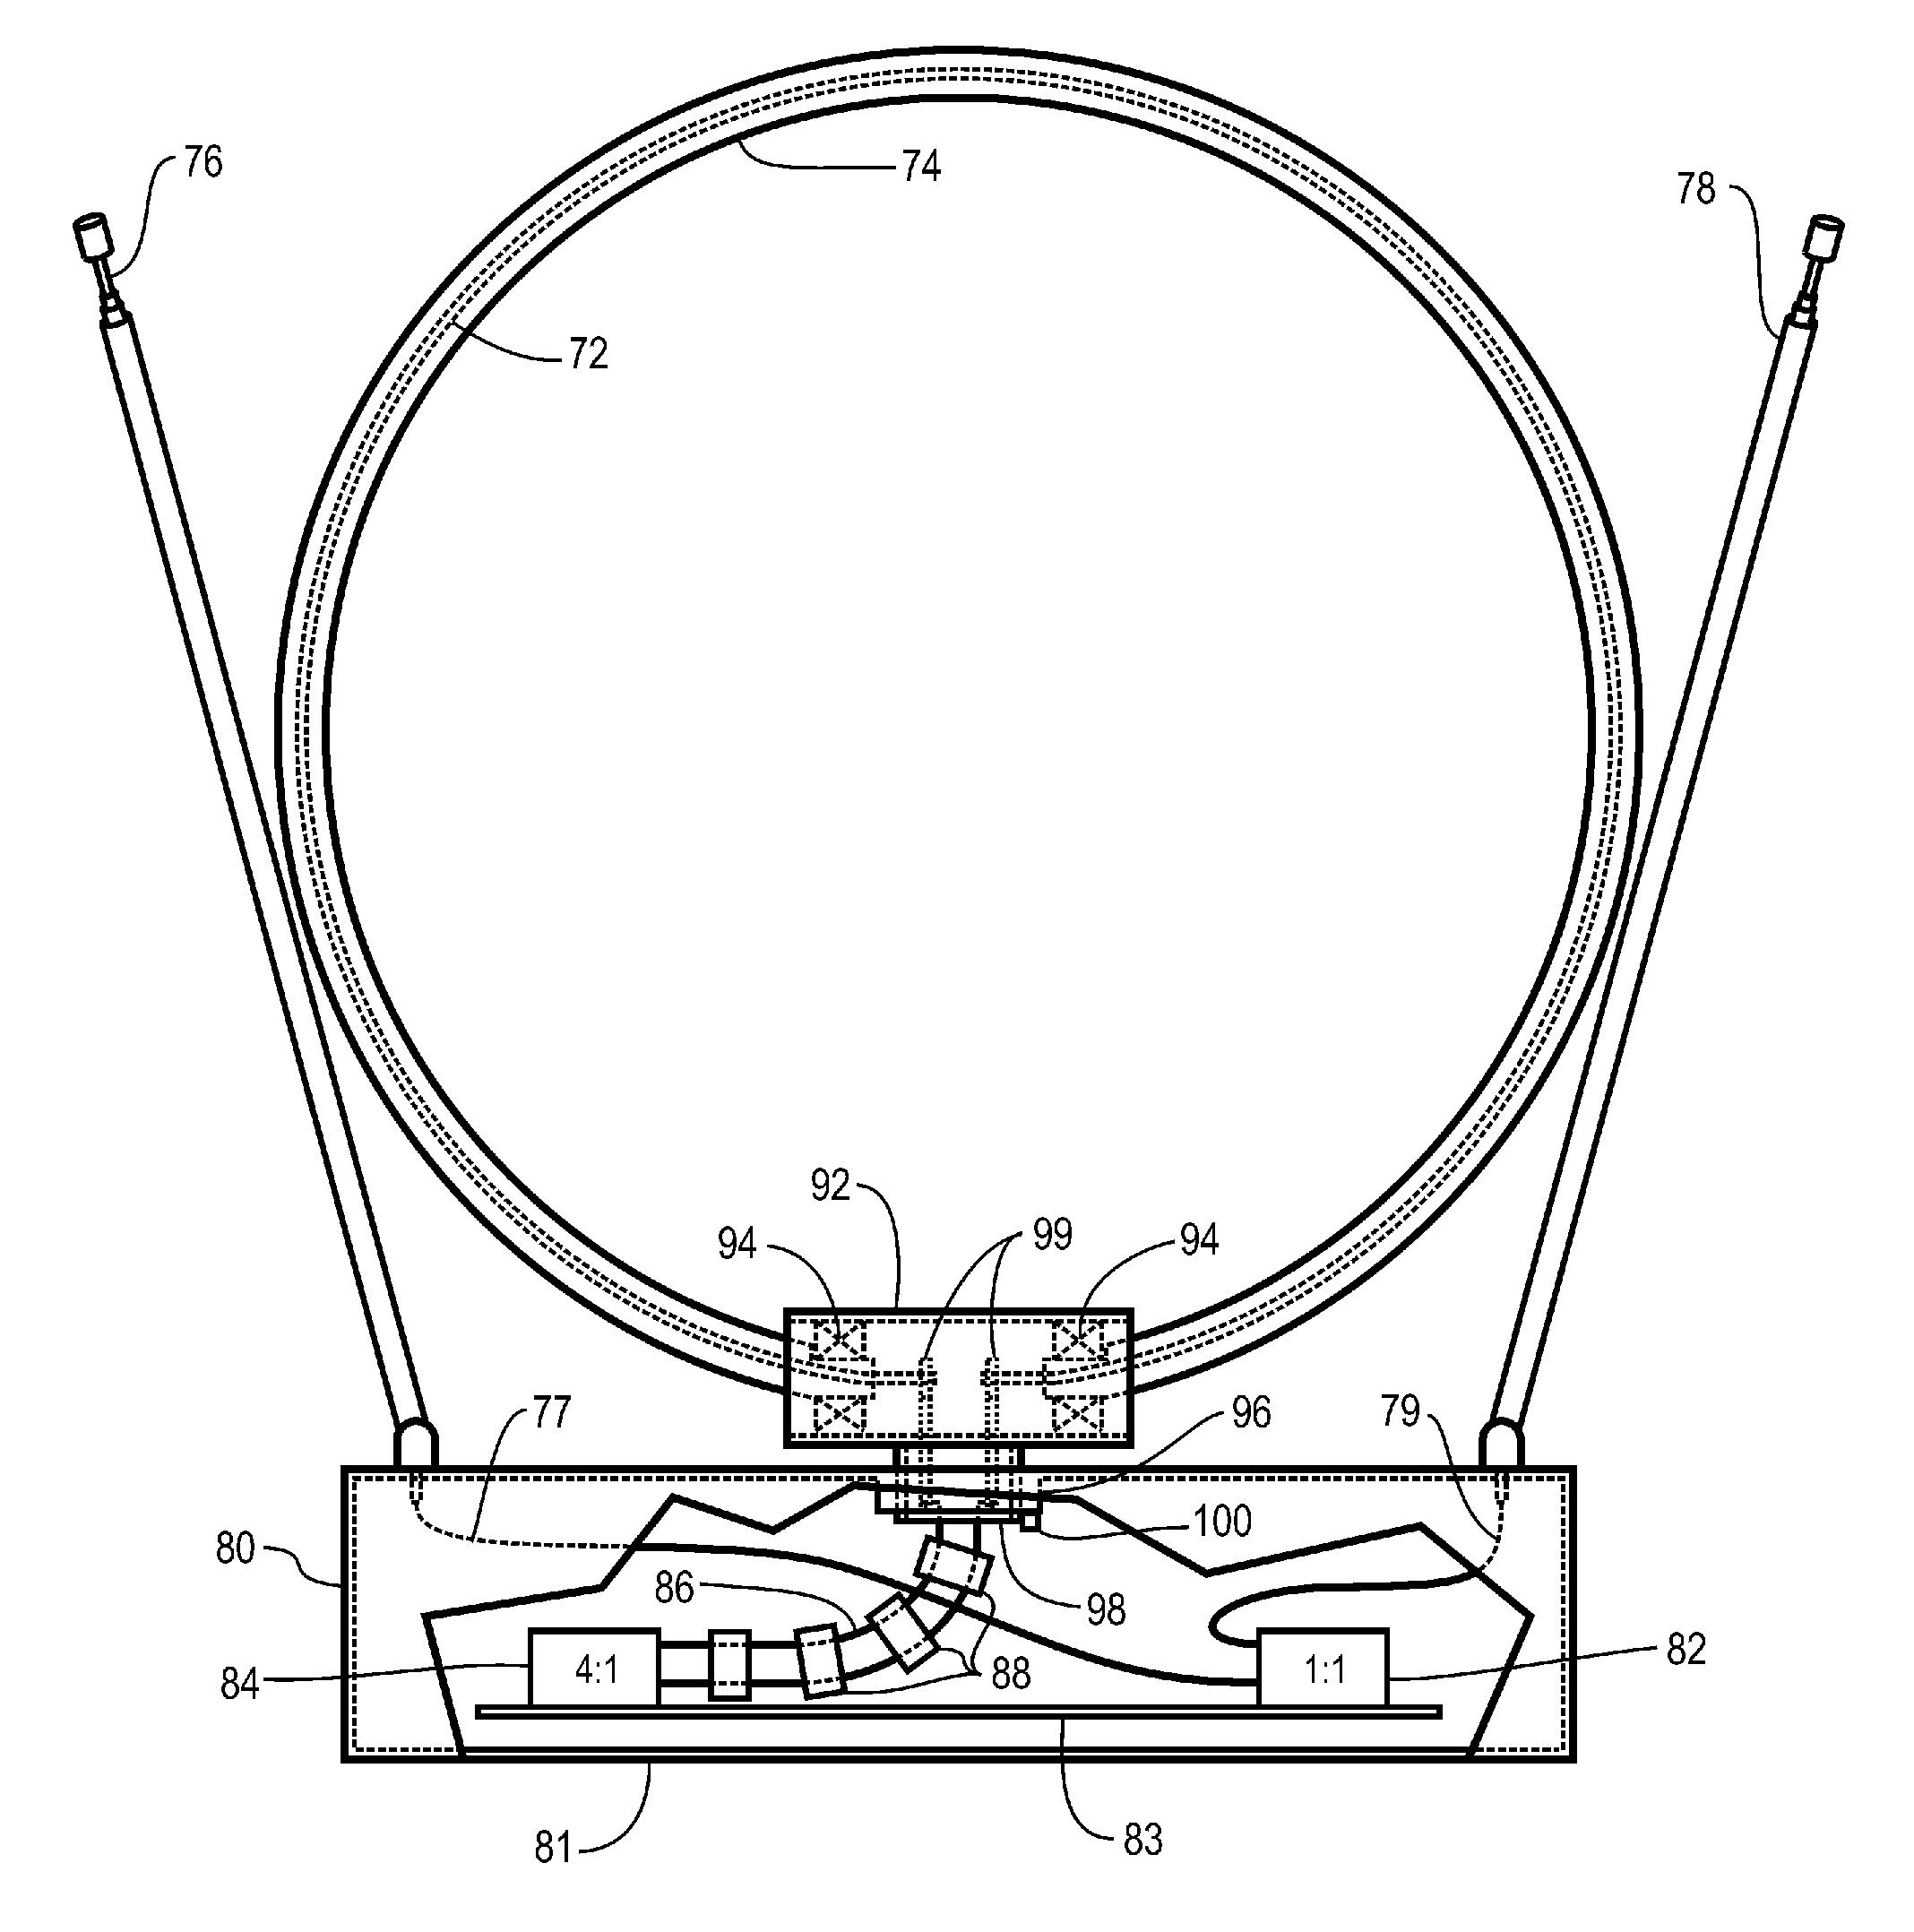 Loop antenna with impedance matching